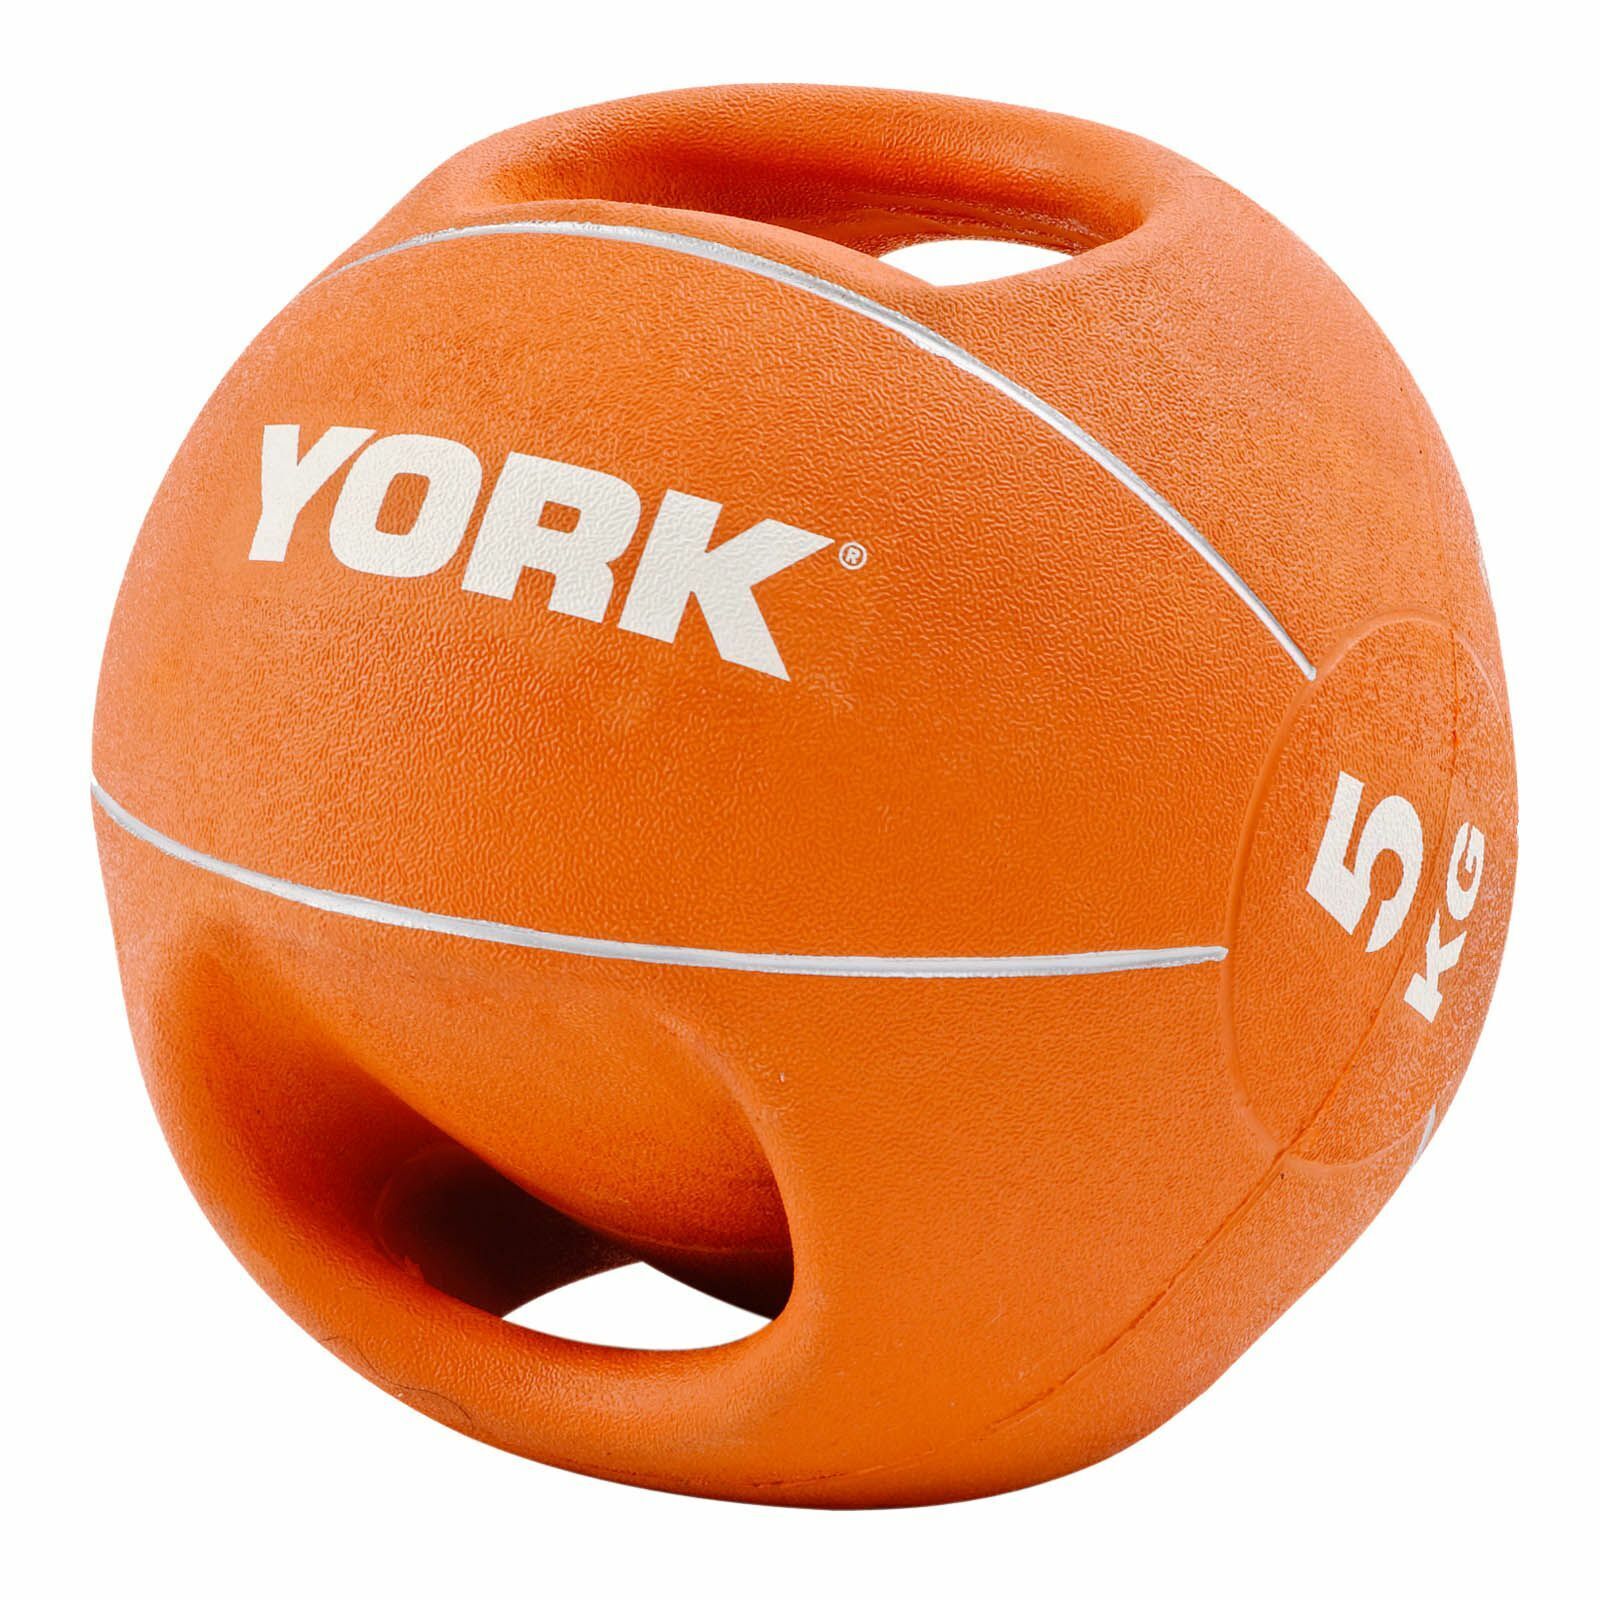 Weighted Exercise Balls With Handles